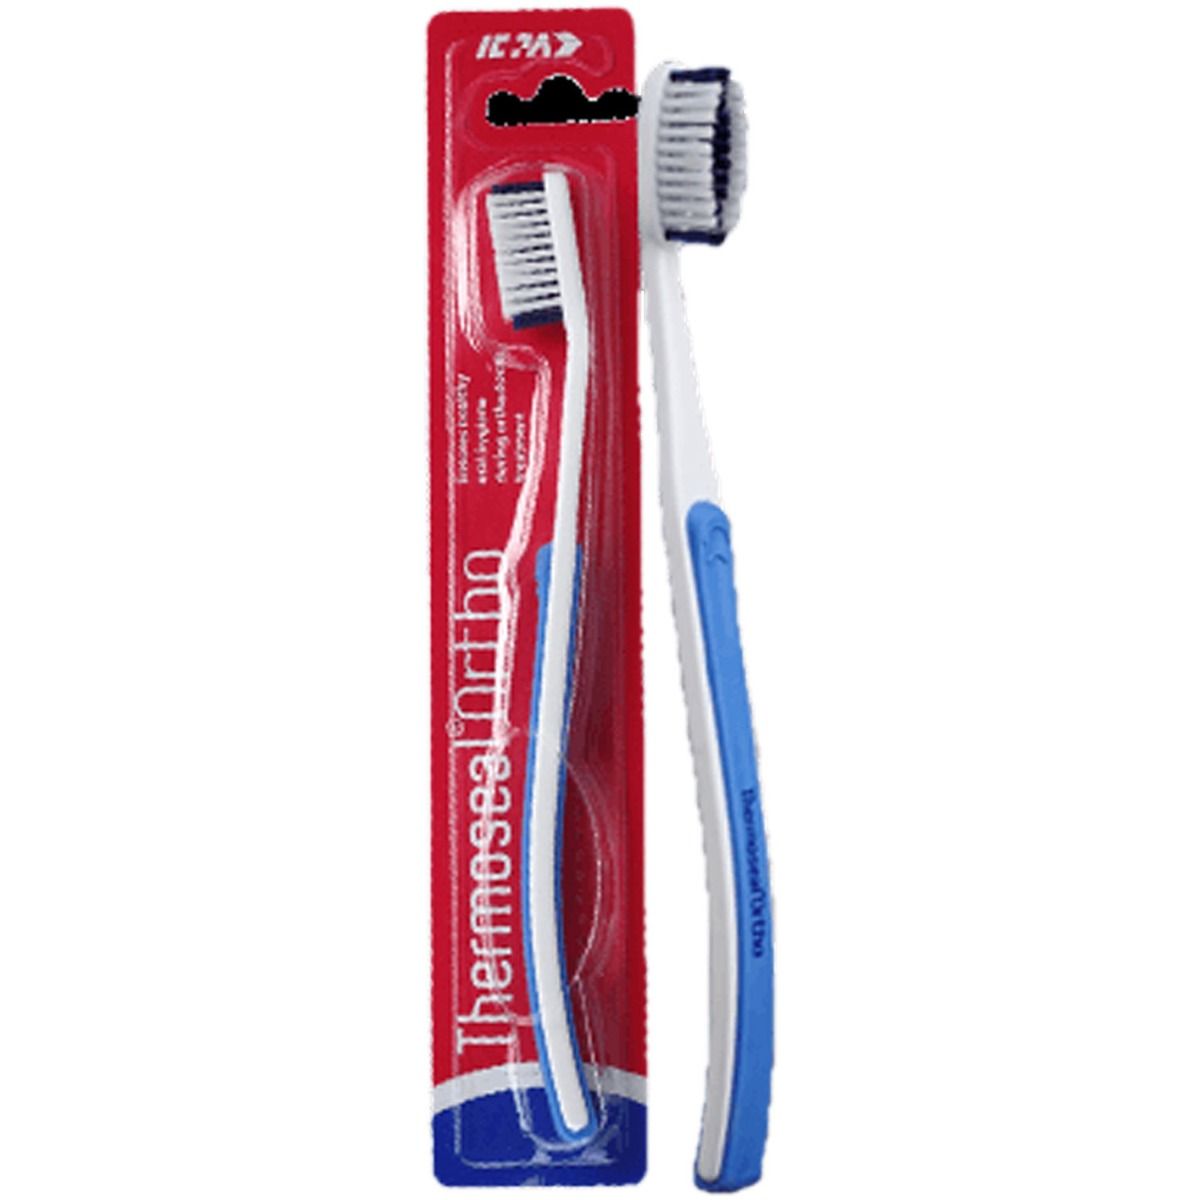 Buy Thermoseal Ortho Brush Online